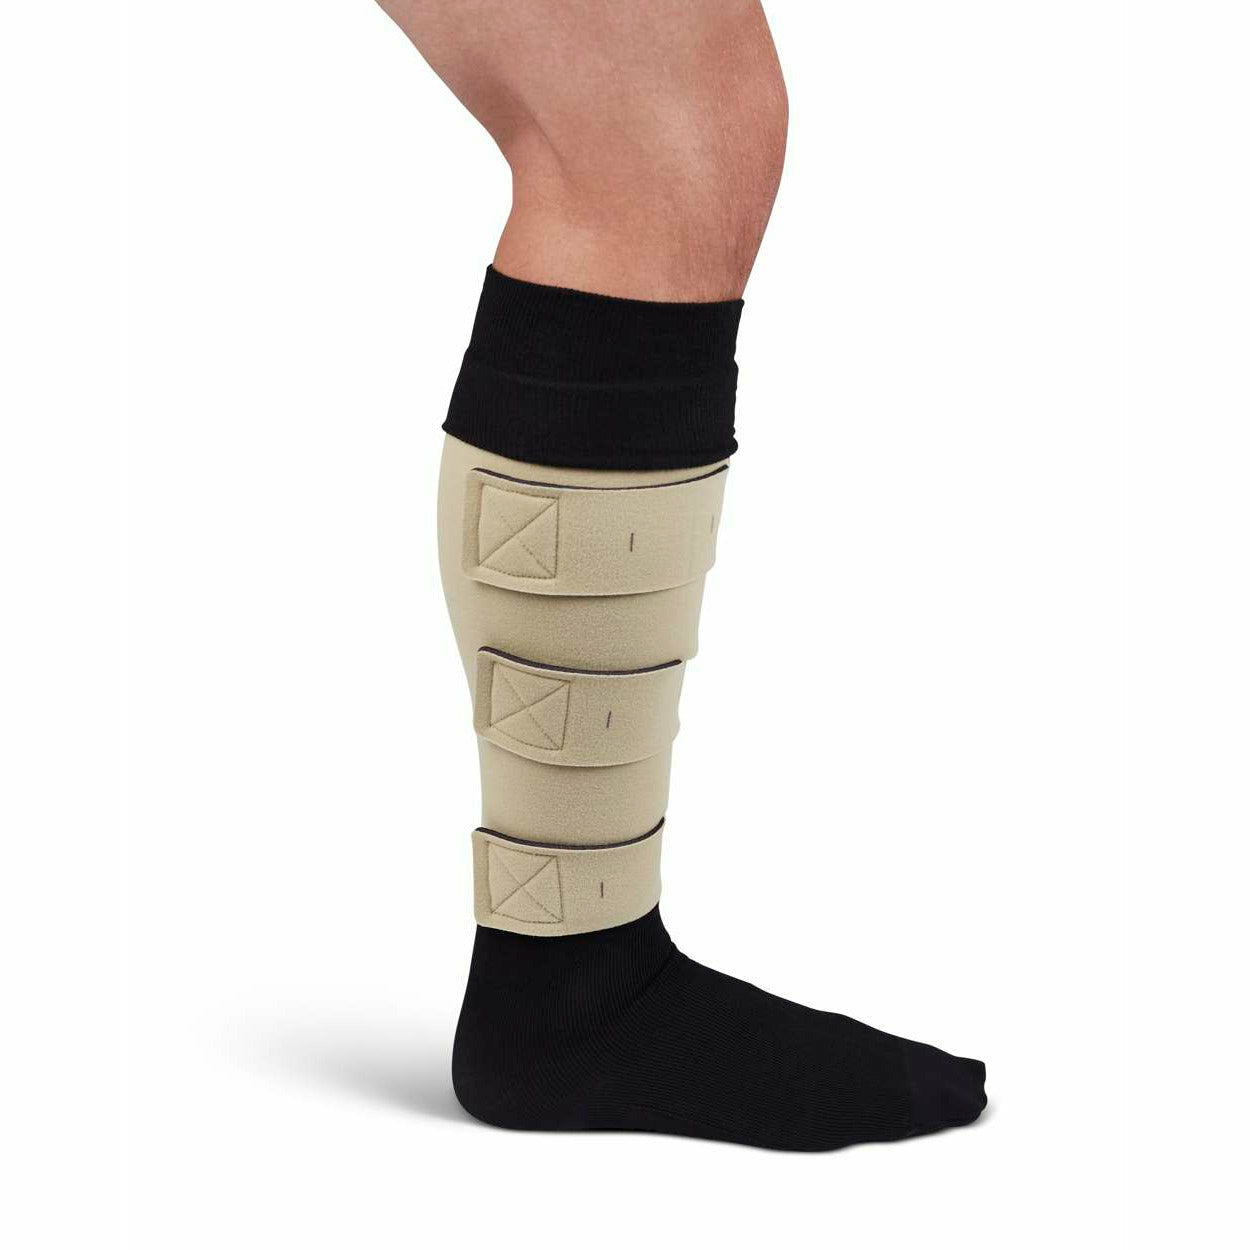 5 Reasons to Wear Compression Wraps for Legs by lymphedemaproducts - Issuu